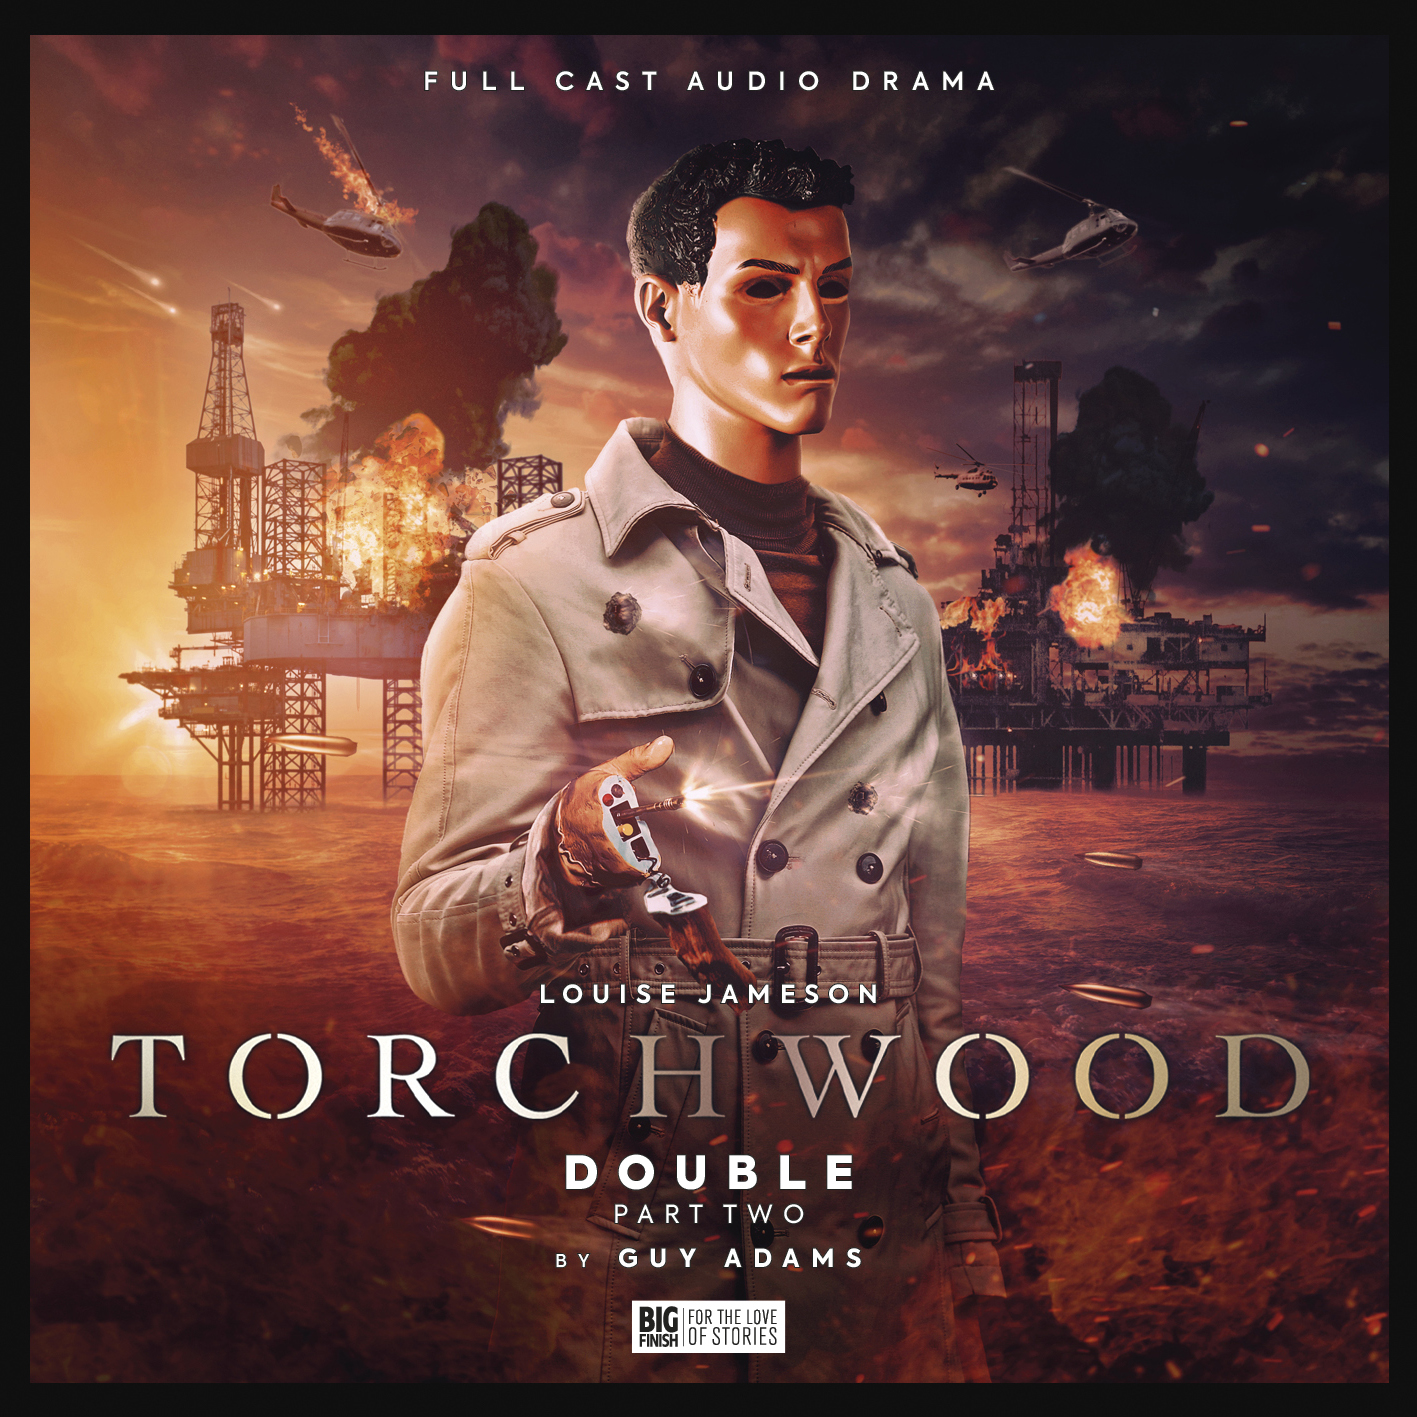 Torchwood Double Part 2 cover art